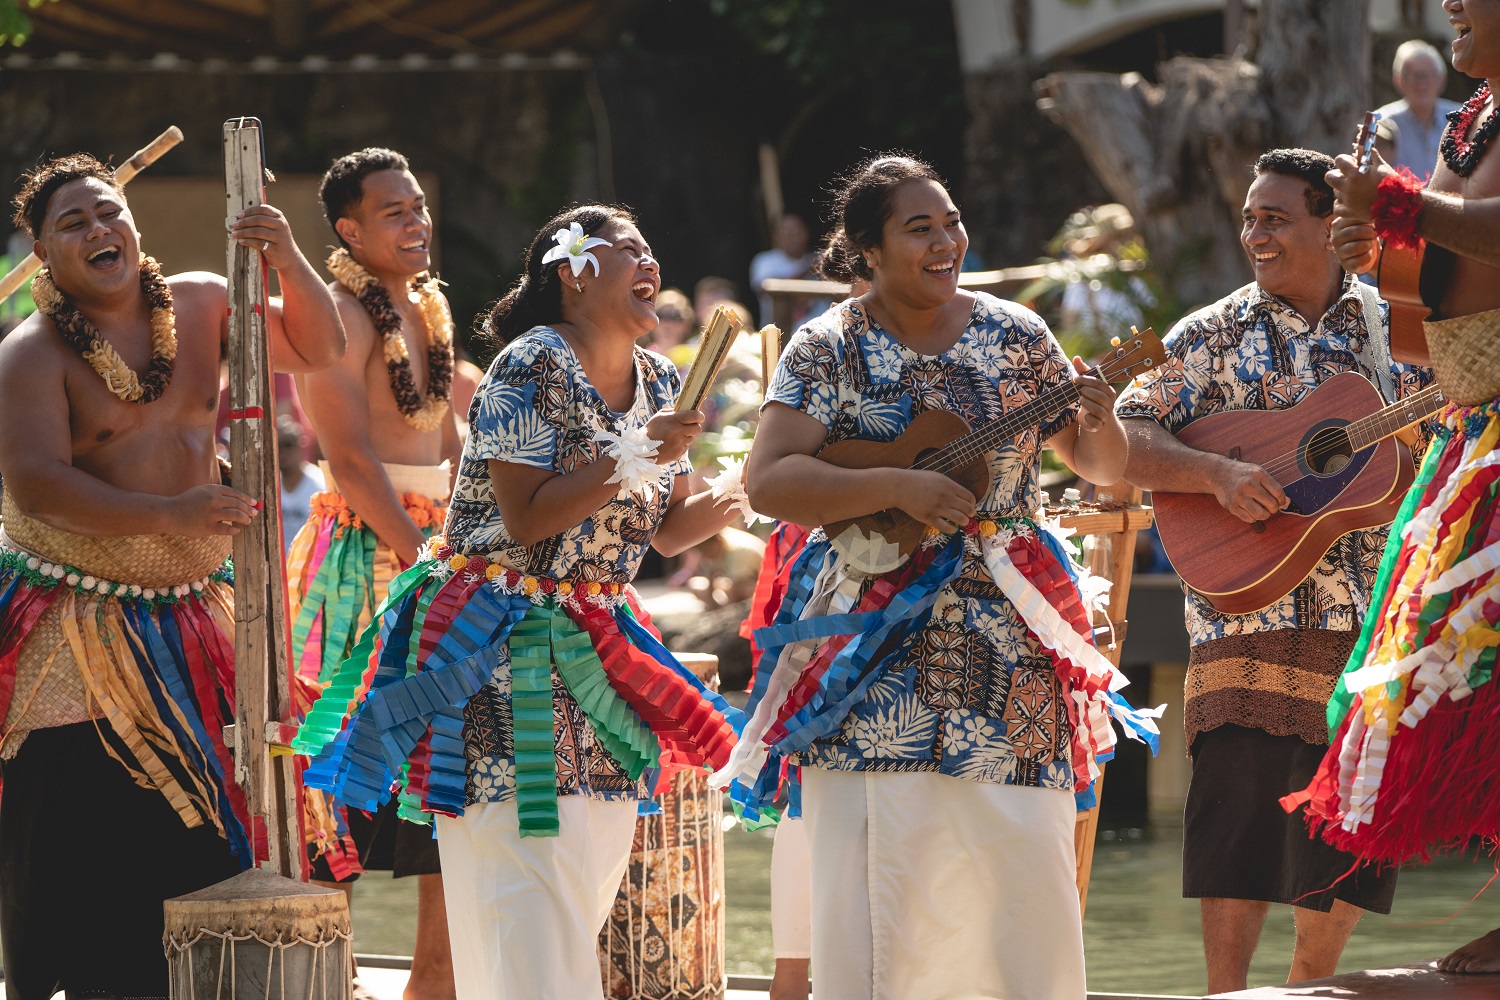 Working at the Polynesian Cultural Center